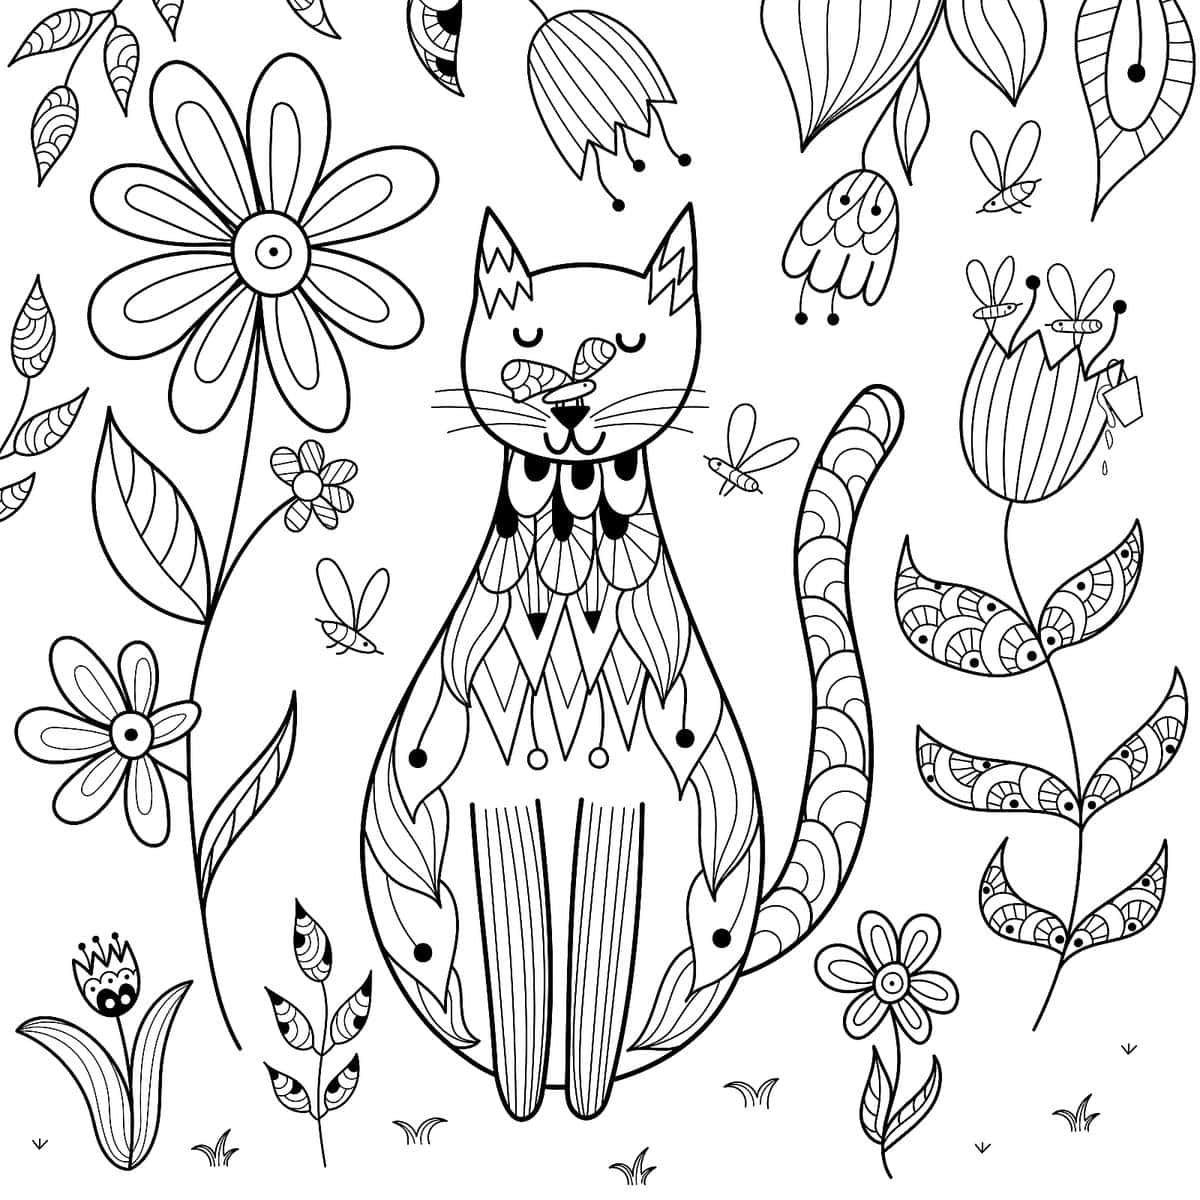 Fascinating Cat Coloring Picture for Children